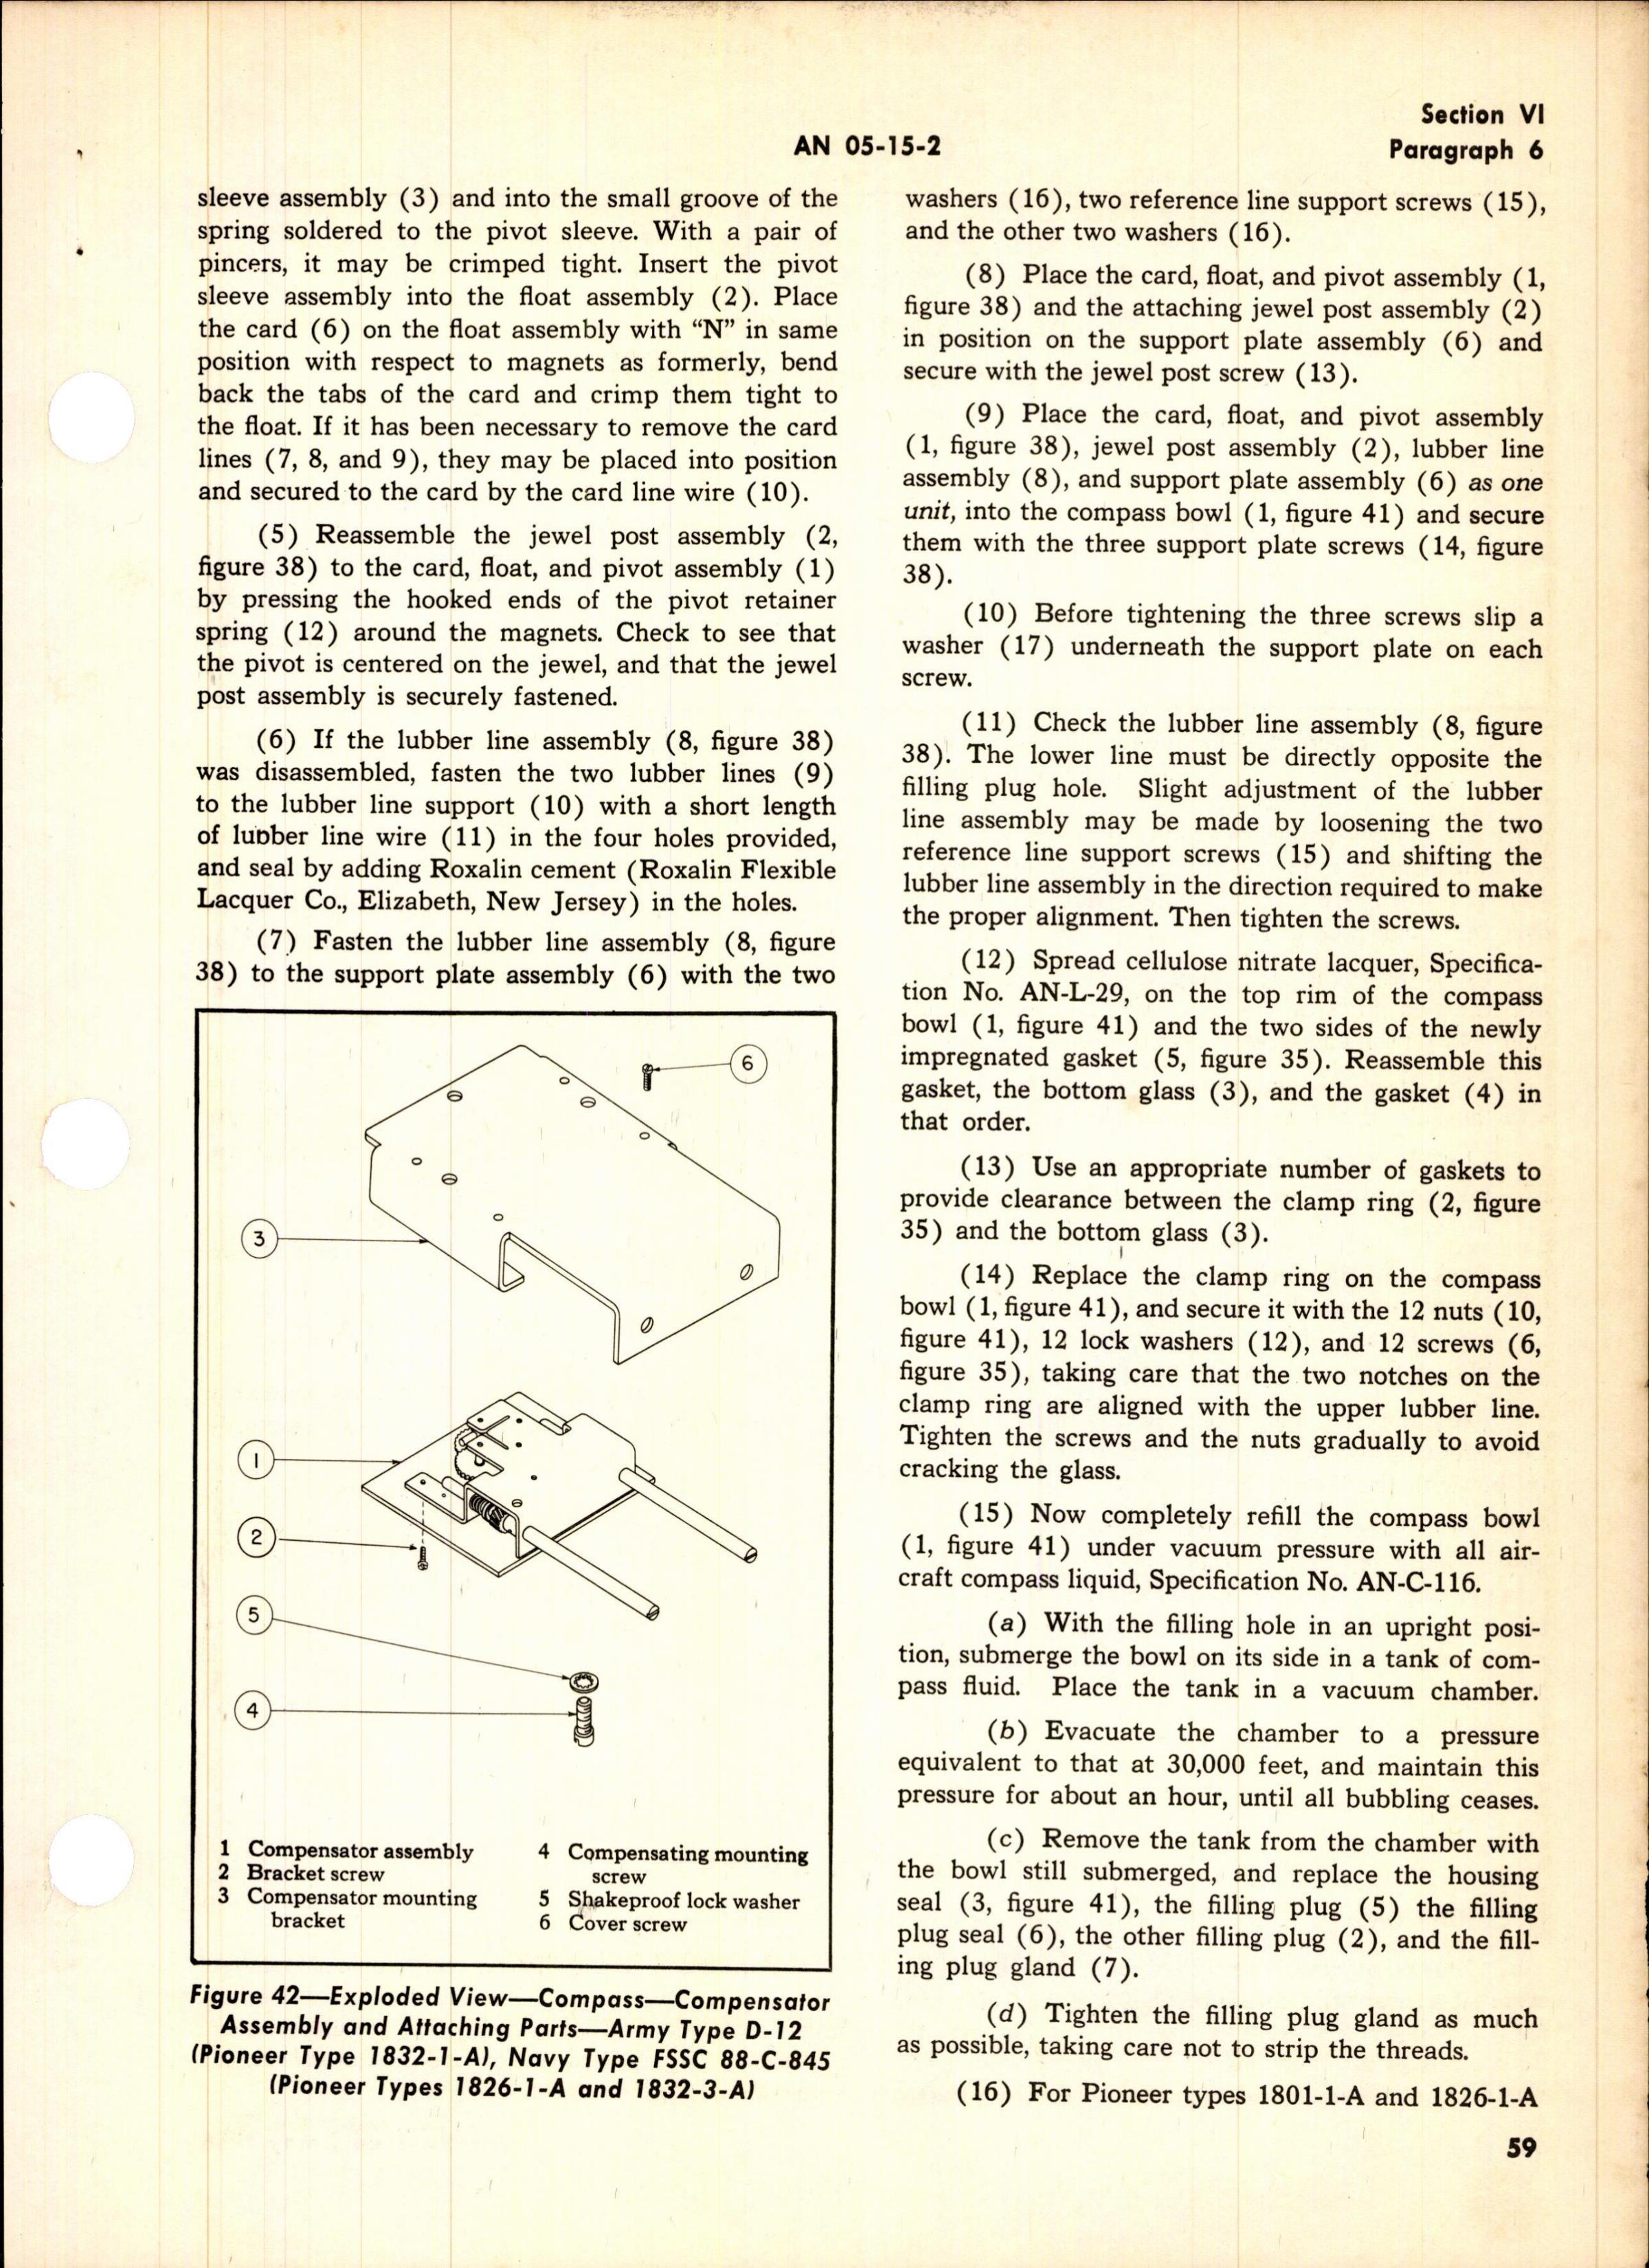 Sample page 3 from AirCorps Library document: Operation, Service, & Overhaul Inst w/ Parts Catalog for Magnetic Compasses (Eclipse-Pioneer)